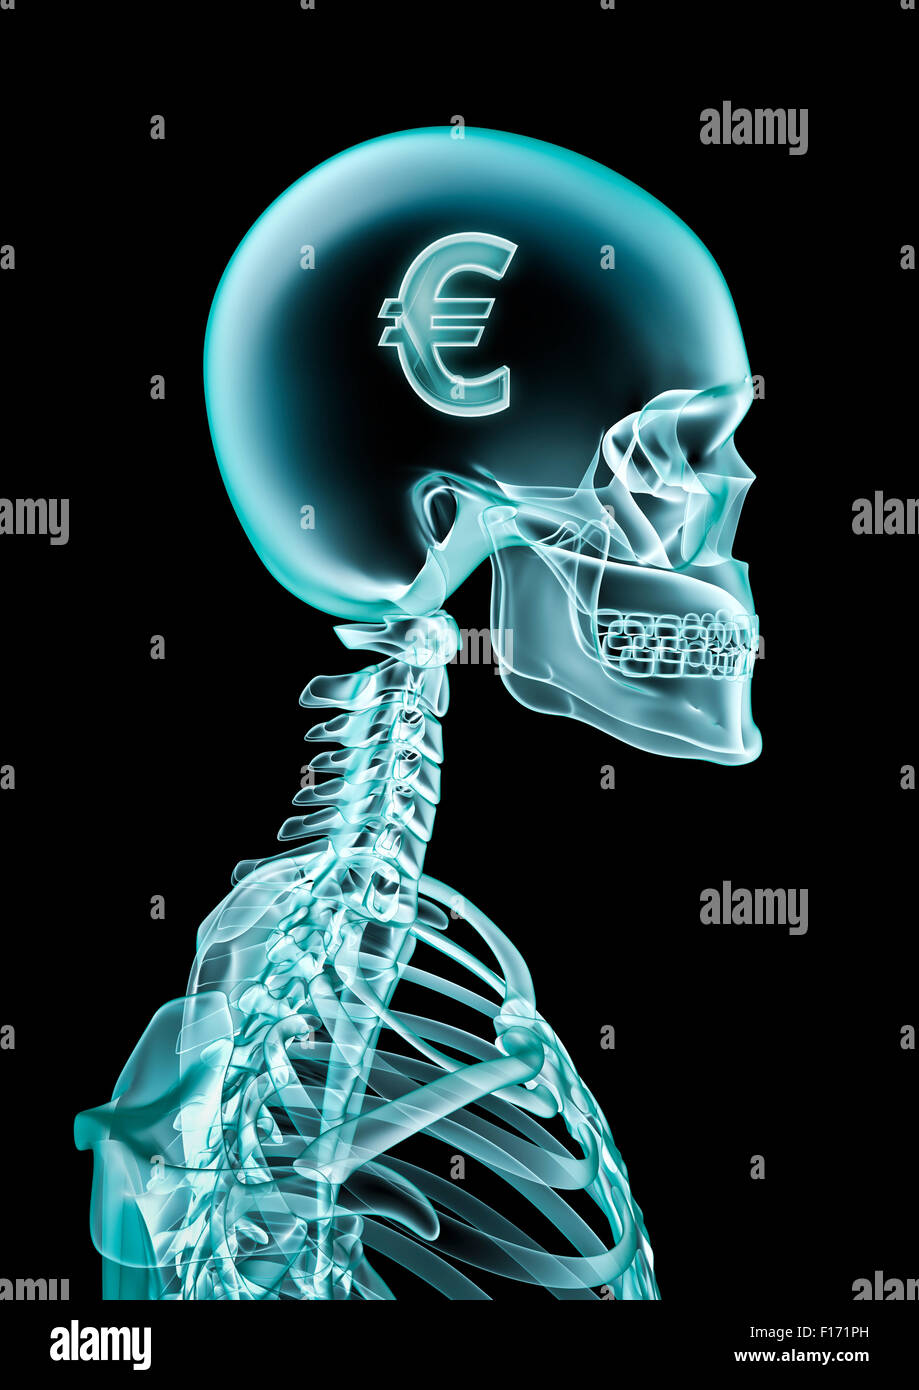 X-ray euro / 3D render of x-ray showing euro symbol inside head Stock Photo